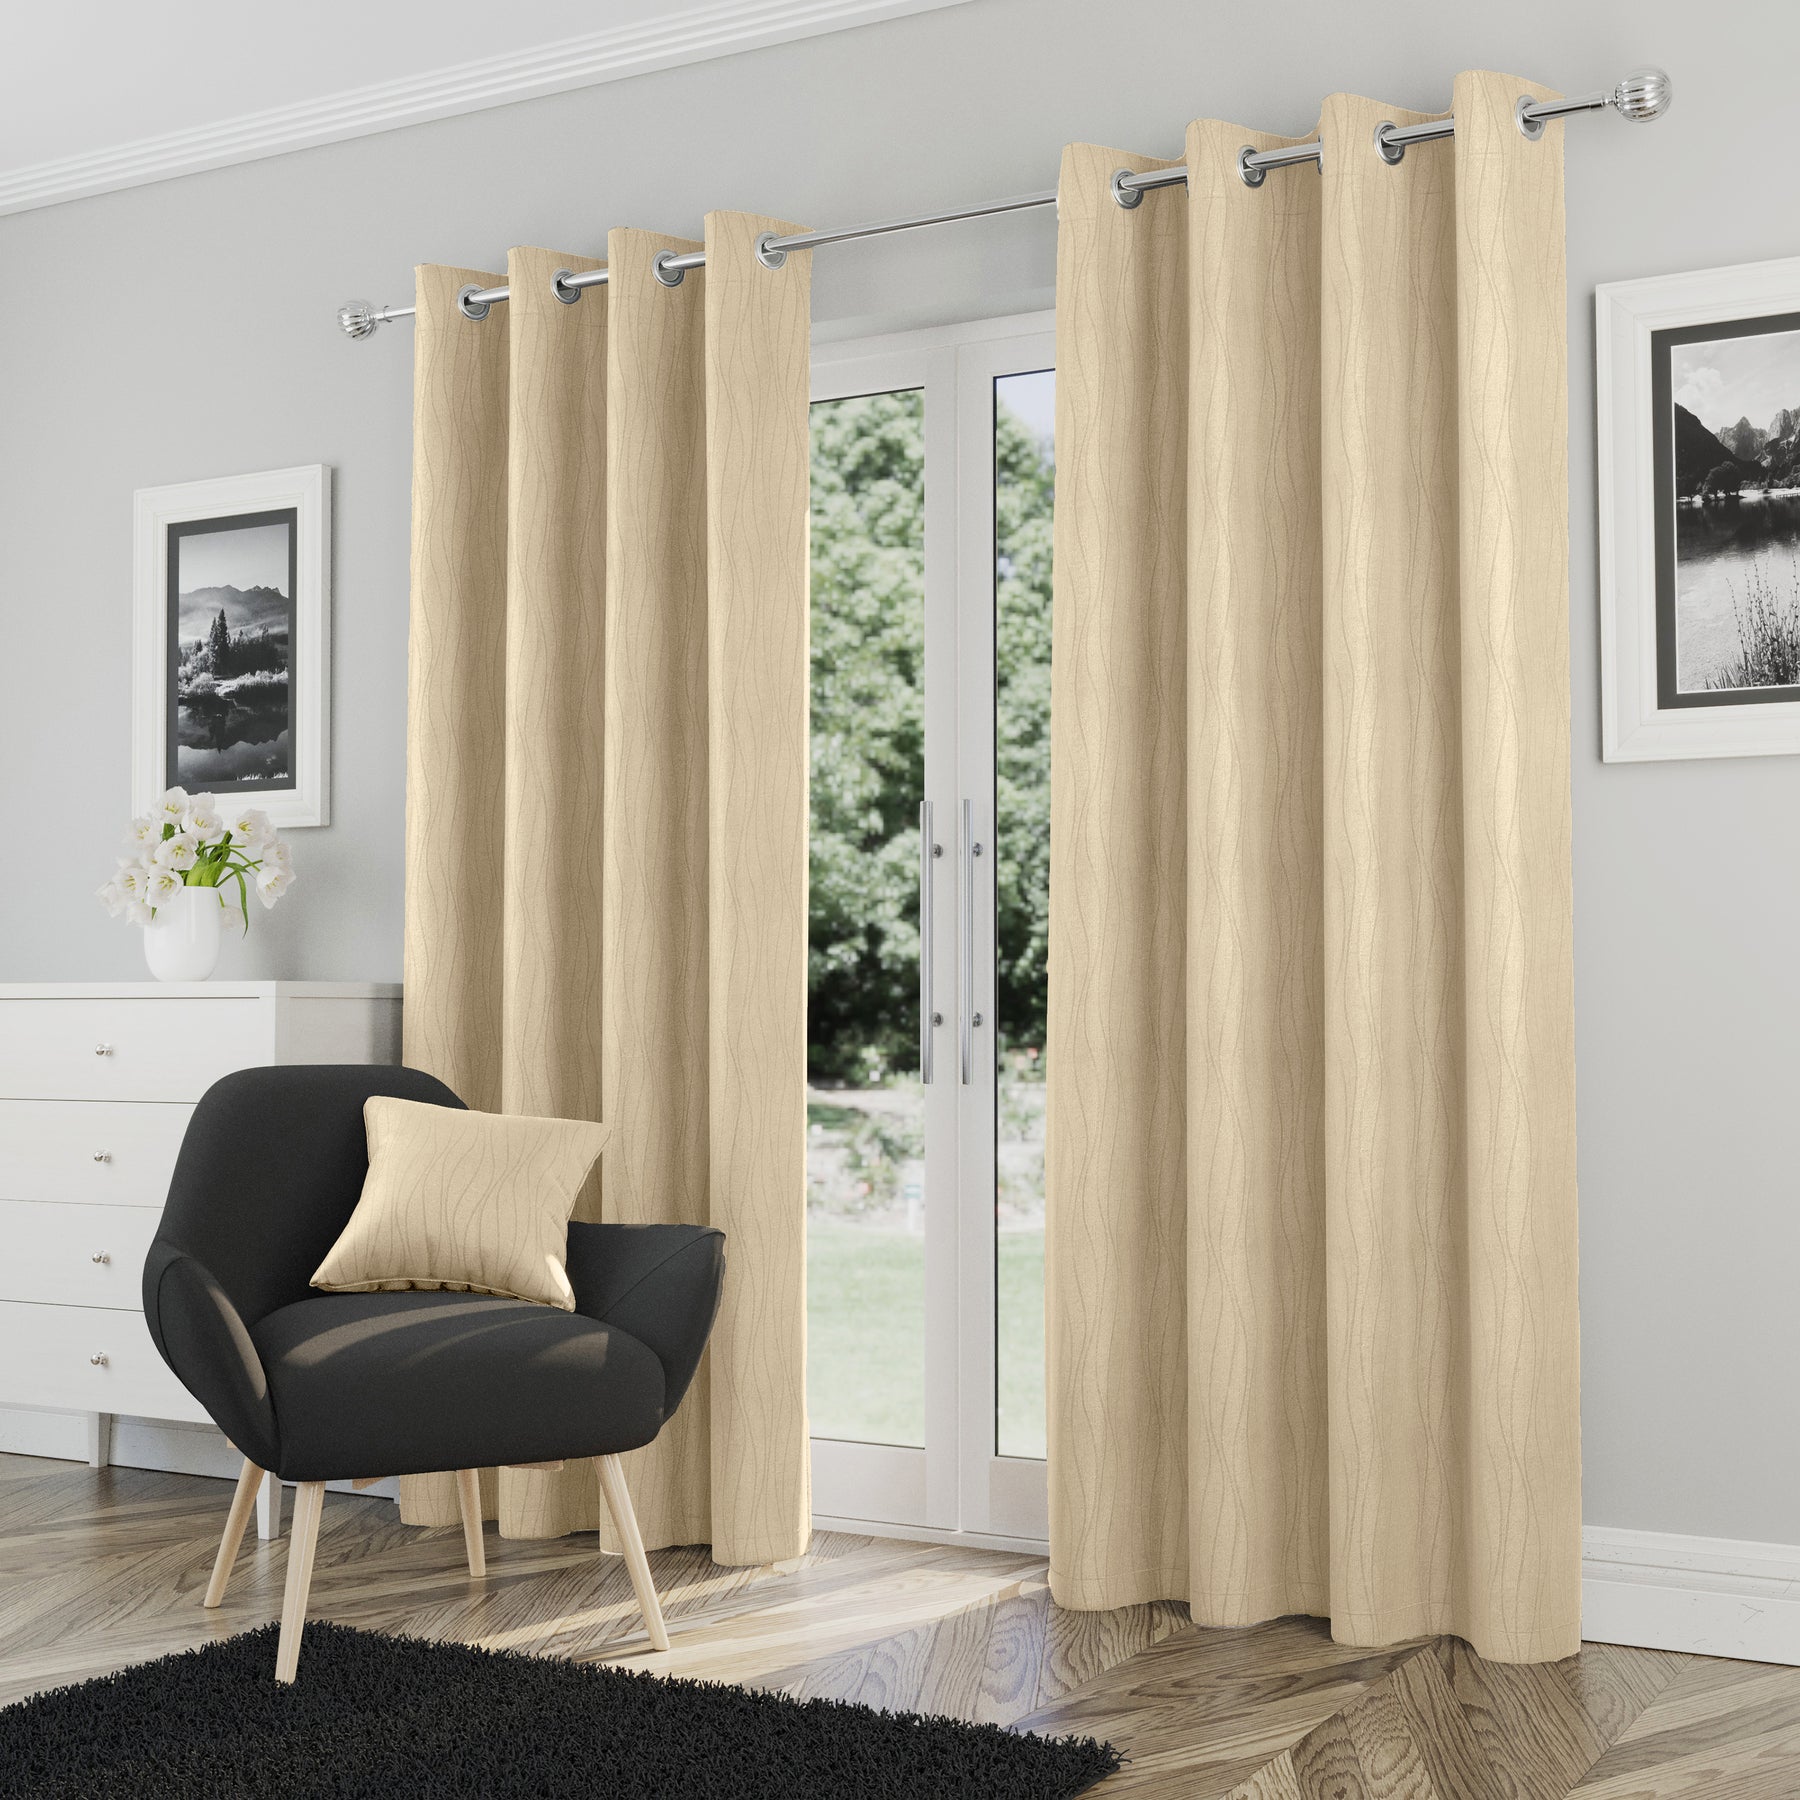 Goodwood Ready Made Eyelet Blockout Curtains Cream